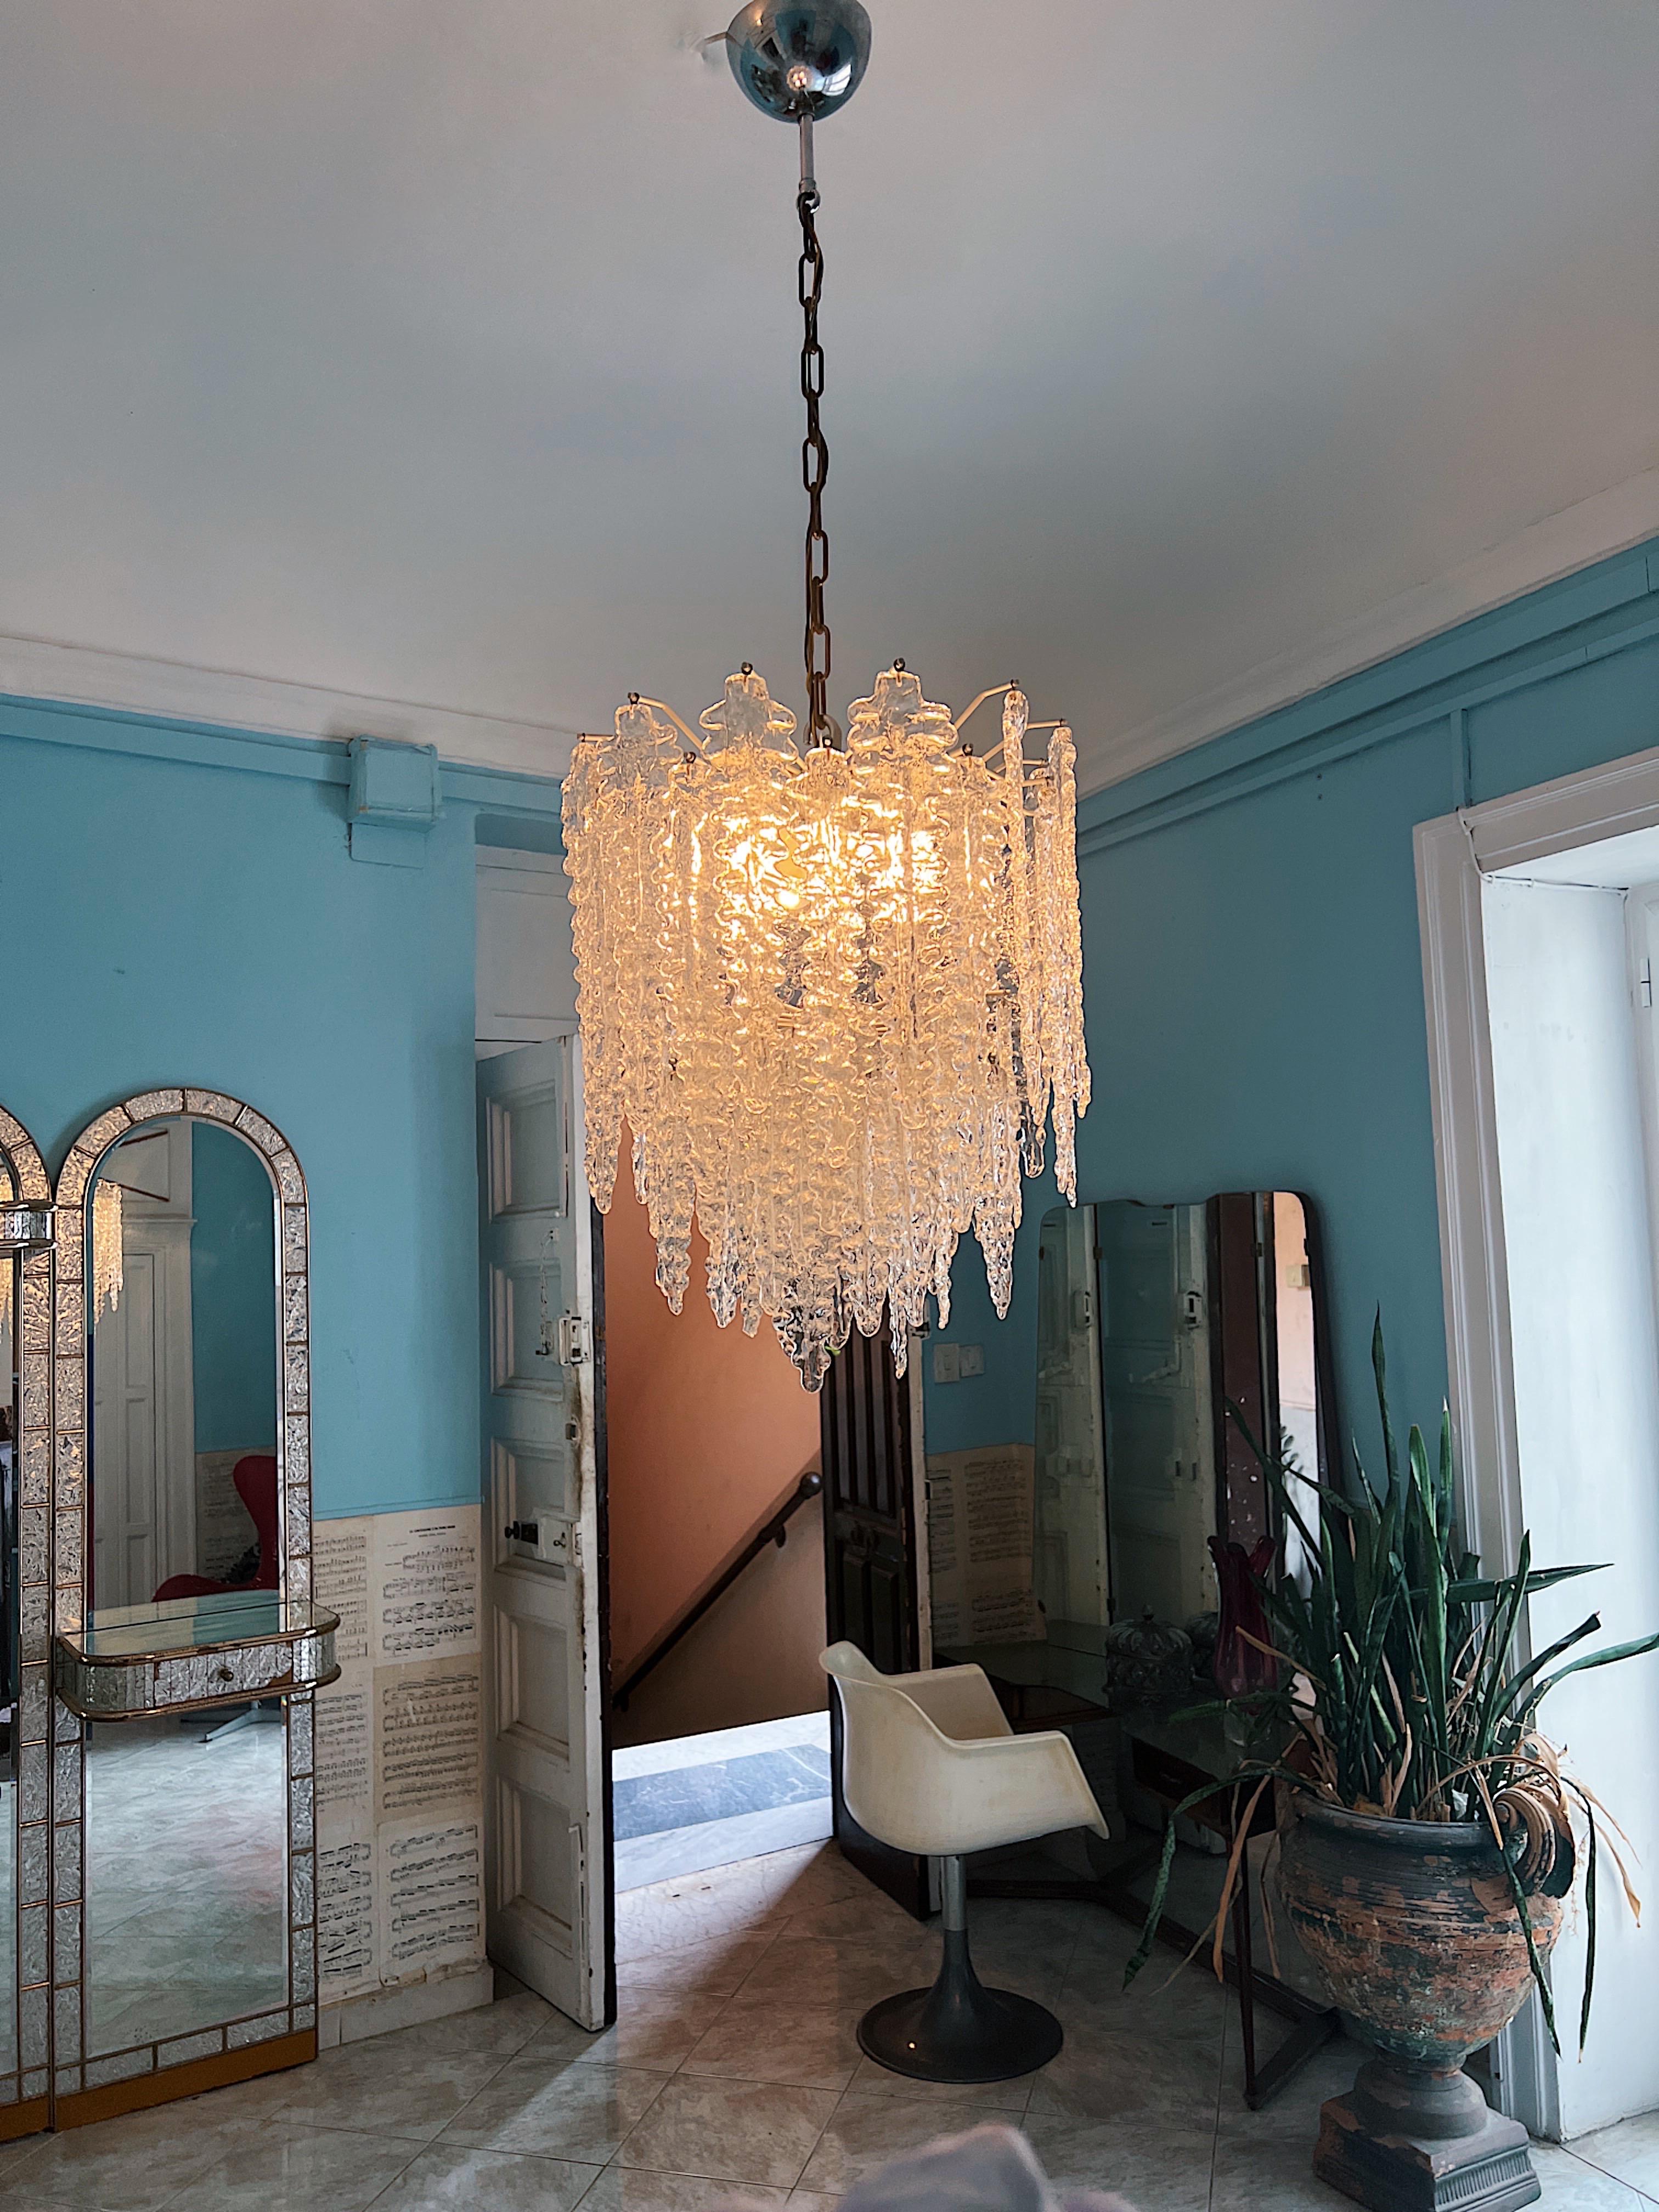 A timeless beauty of Murano glass. This opulent chandelier, a masterpiece, was artfully crafted by Venini in 1960. Its grandeur is composed of 60 meticulously handcrafted Murano glass leaves, gracefully arranged upon a brass base of three tiles.

In